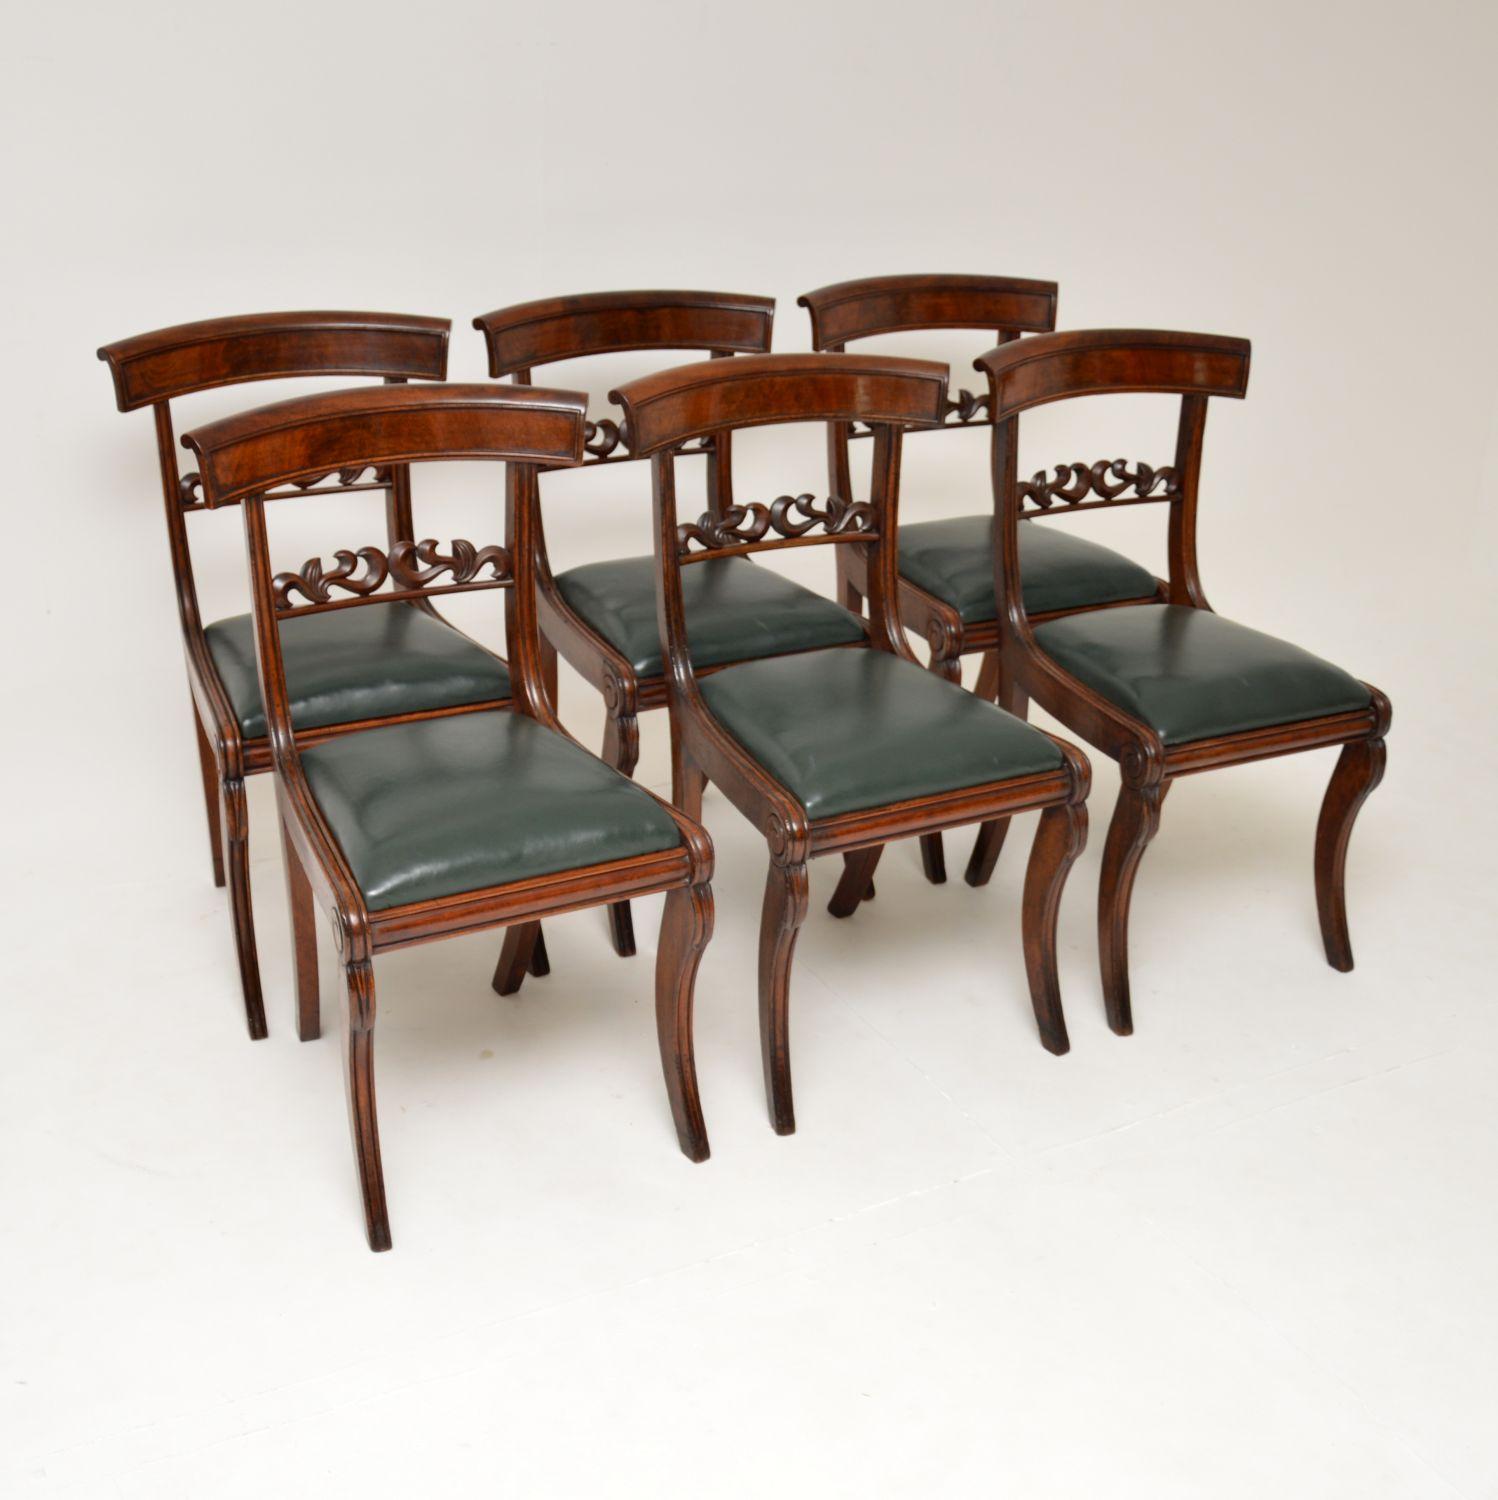 A superb set of original antique Regency period dining chairs. They were made in England, and date from around the 1820-1840’s.

The quality is fantastic, they have lovely curved upper backrests and beautiful carving just below. They sit on elegant